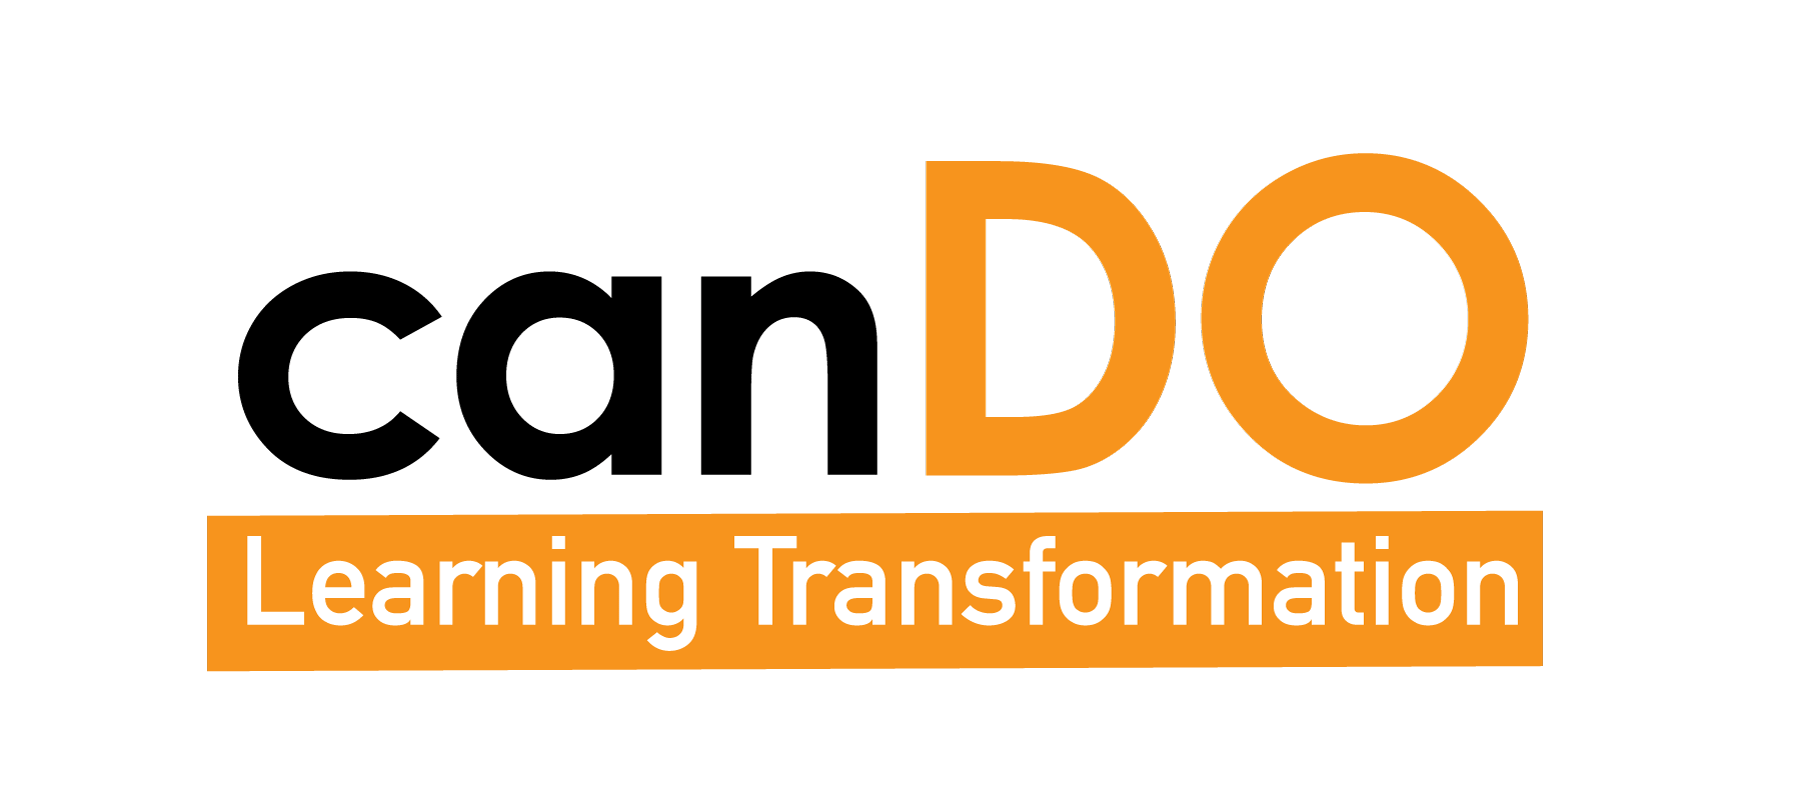 Cando Learning Transformation